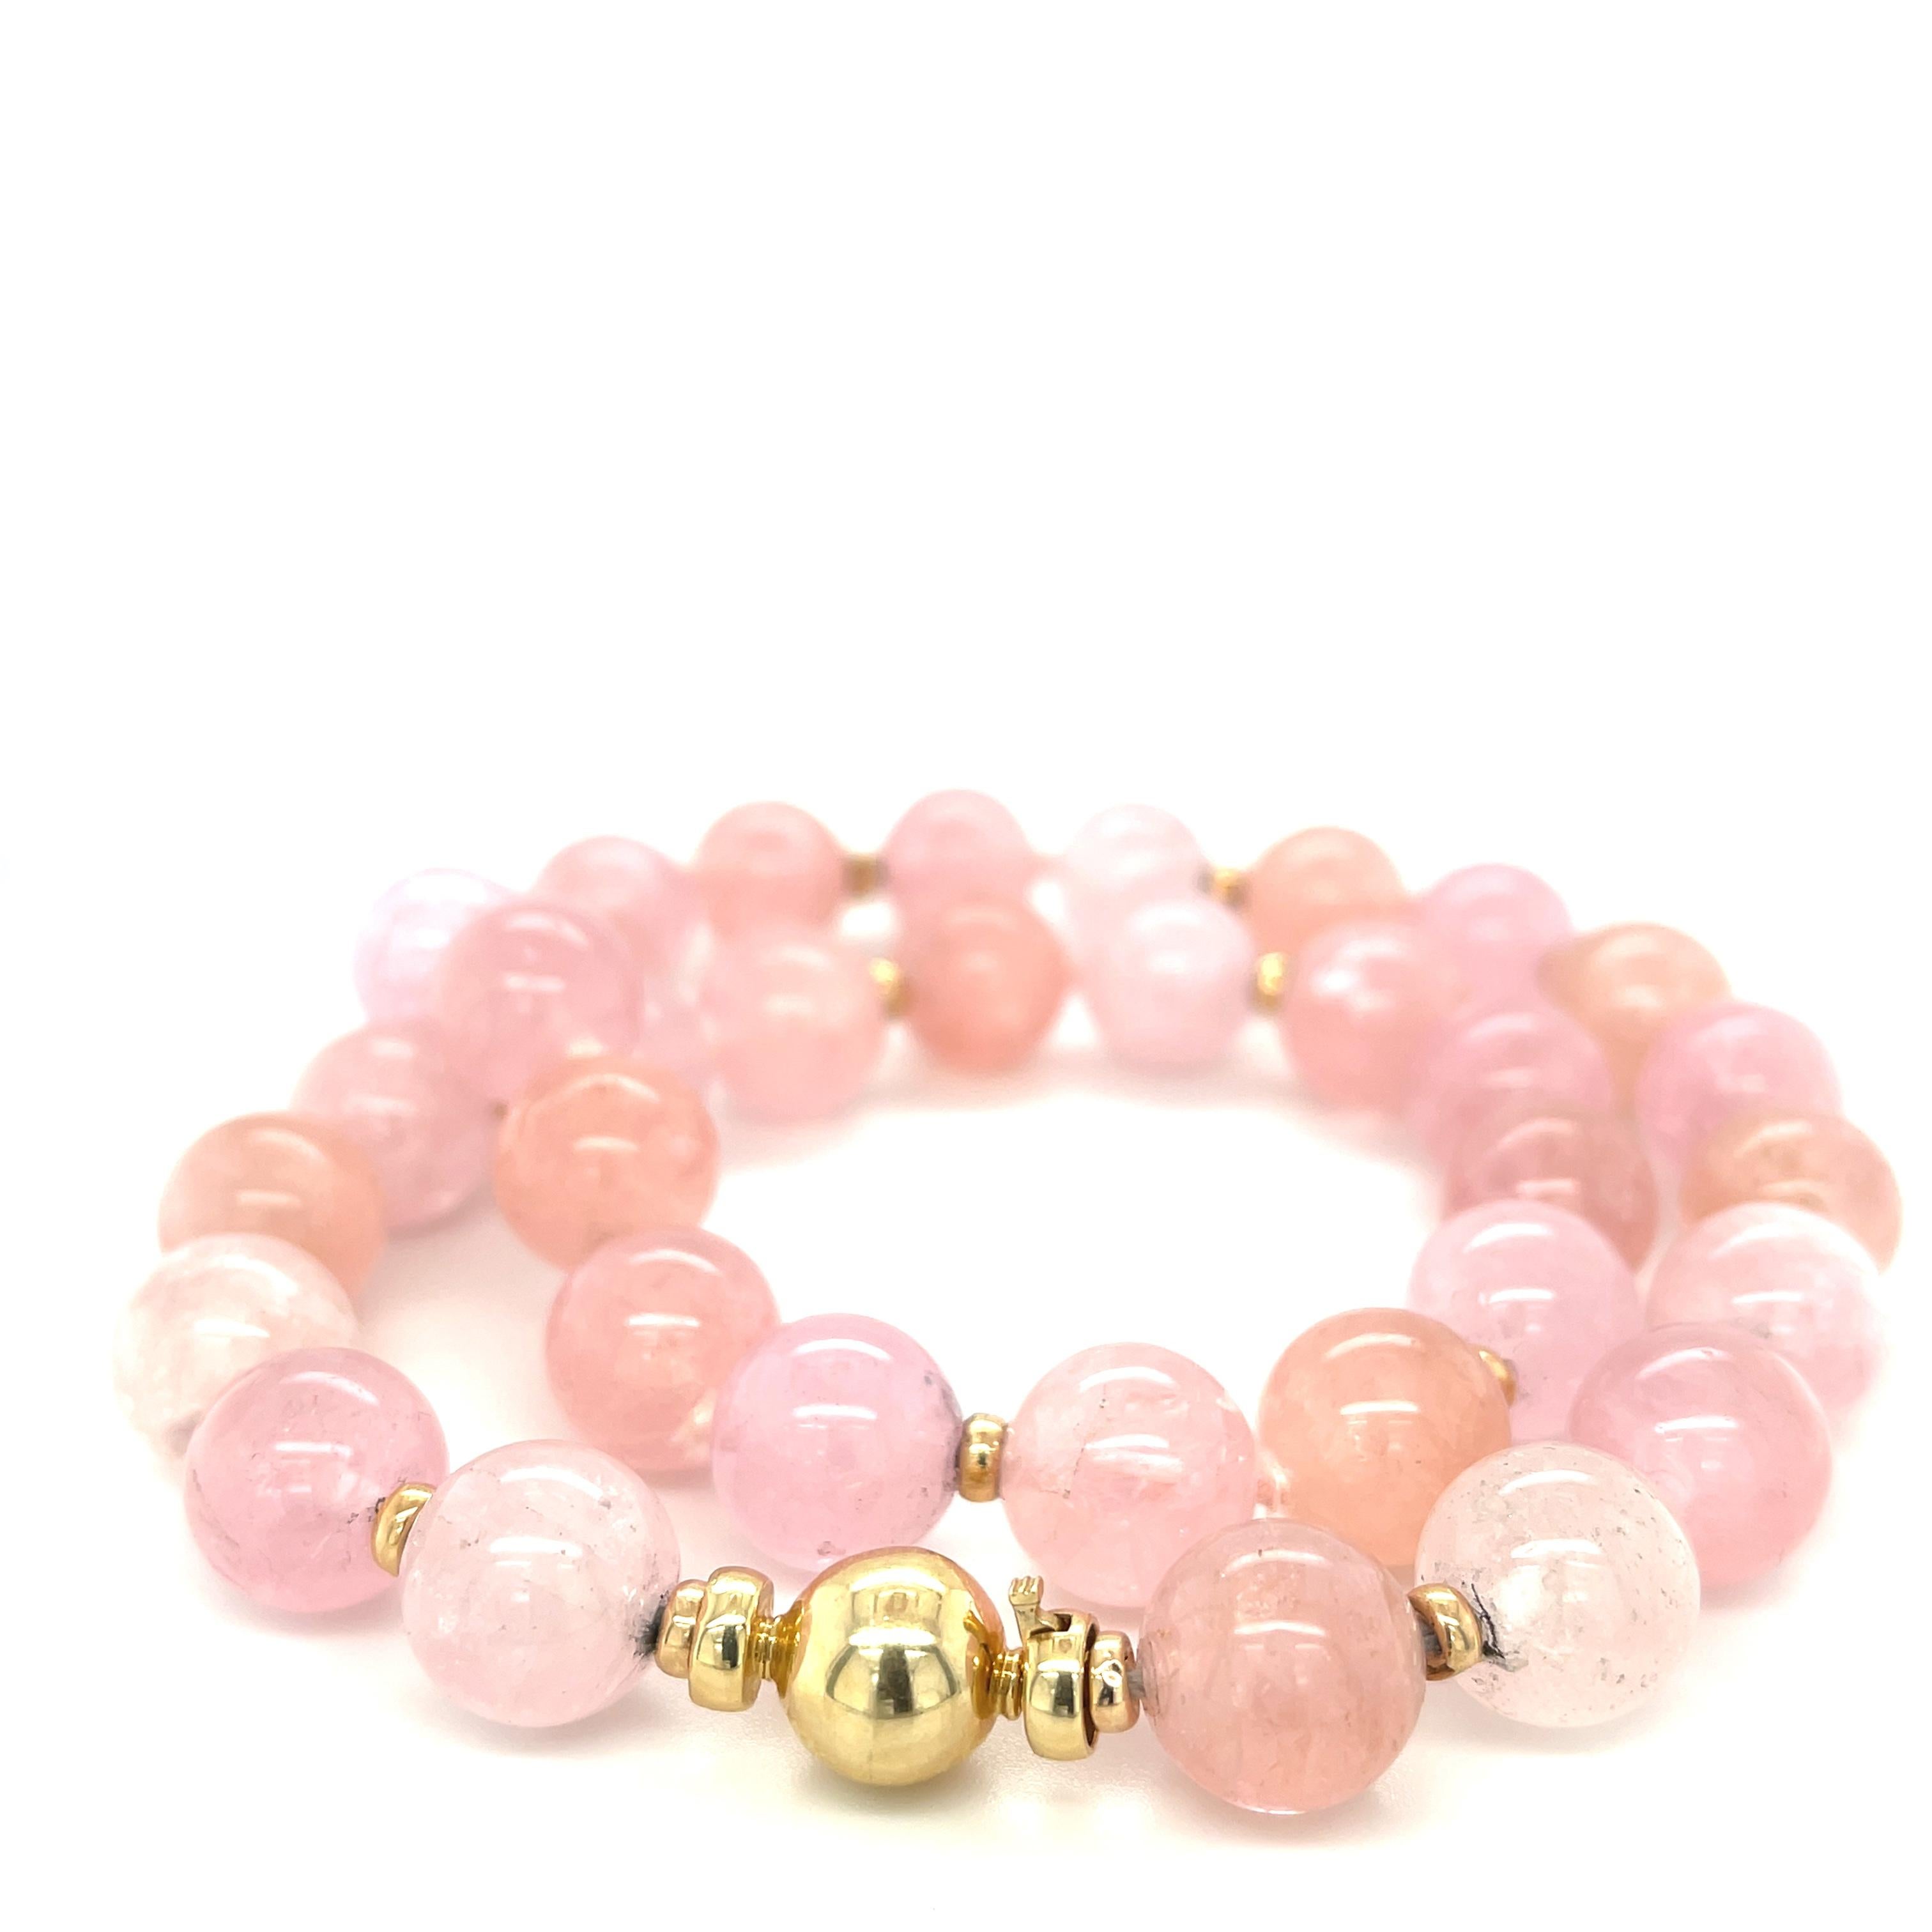 If you love shades of pink and peach, this morganite beaded necklace is perfect for you! Beautifully translucent 12mm round morganite beads have been hand strung on pink silk thread with 14k yellow gold accents finished with a 14k yellow gold ball